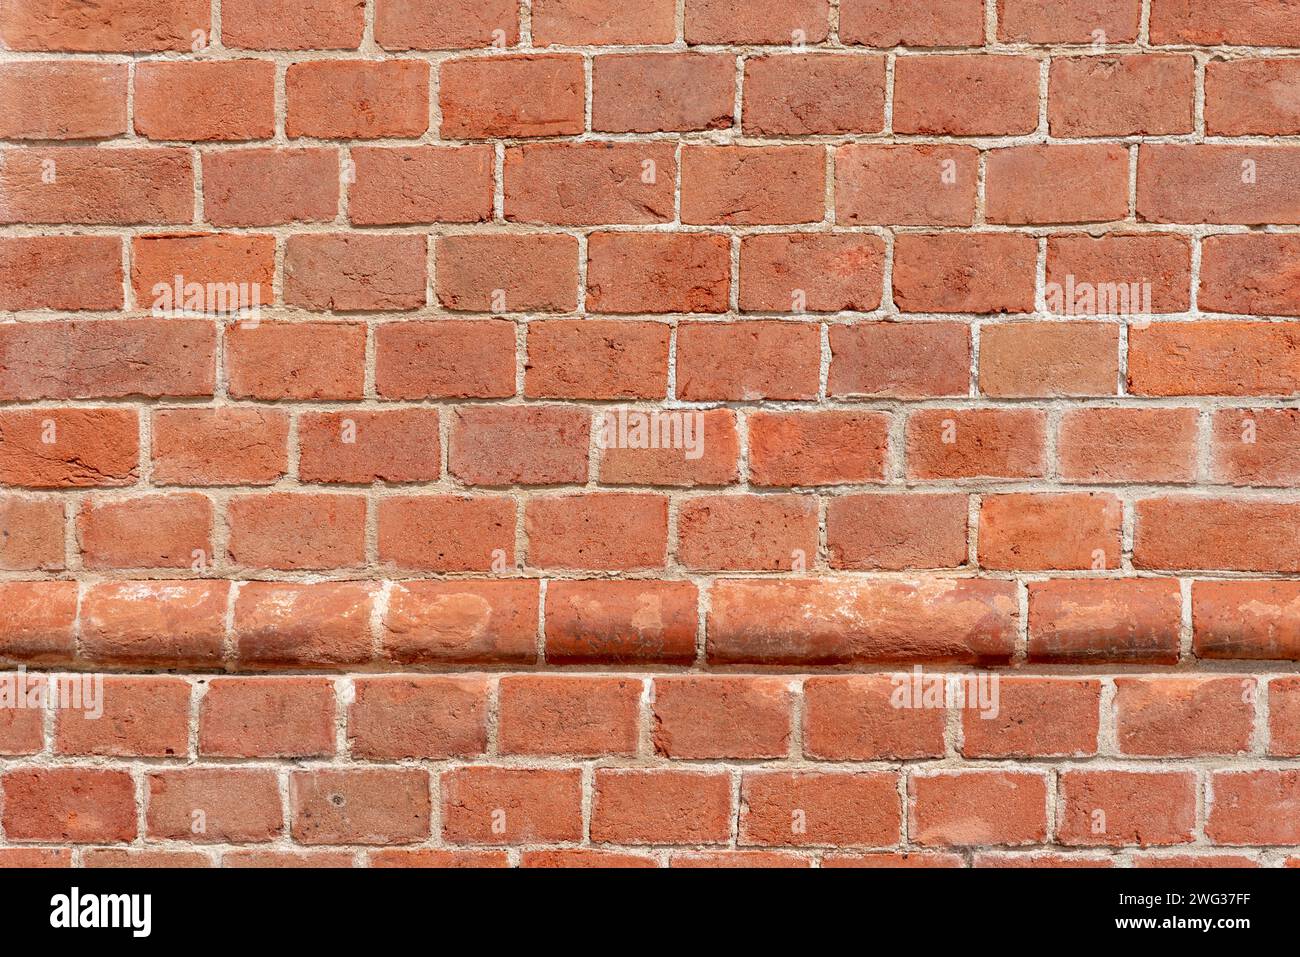 Wall texture with red bricks, geometric background with horizontal row of protruding, round red bricks, Background with copy space Stock Photo